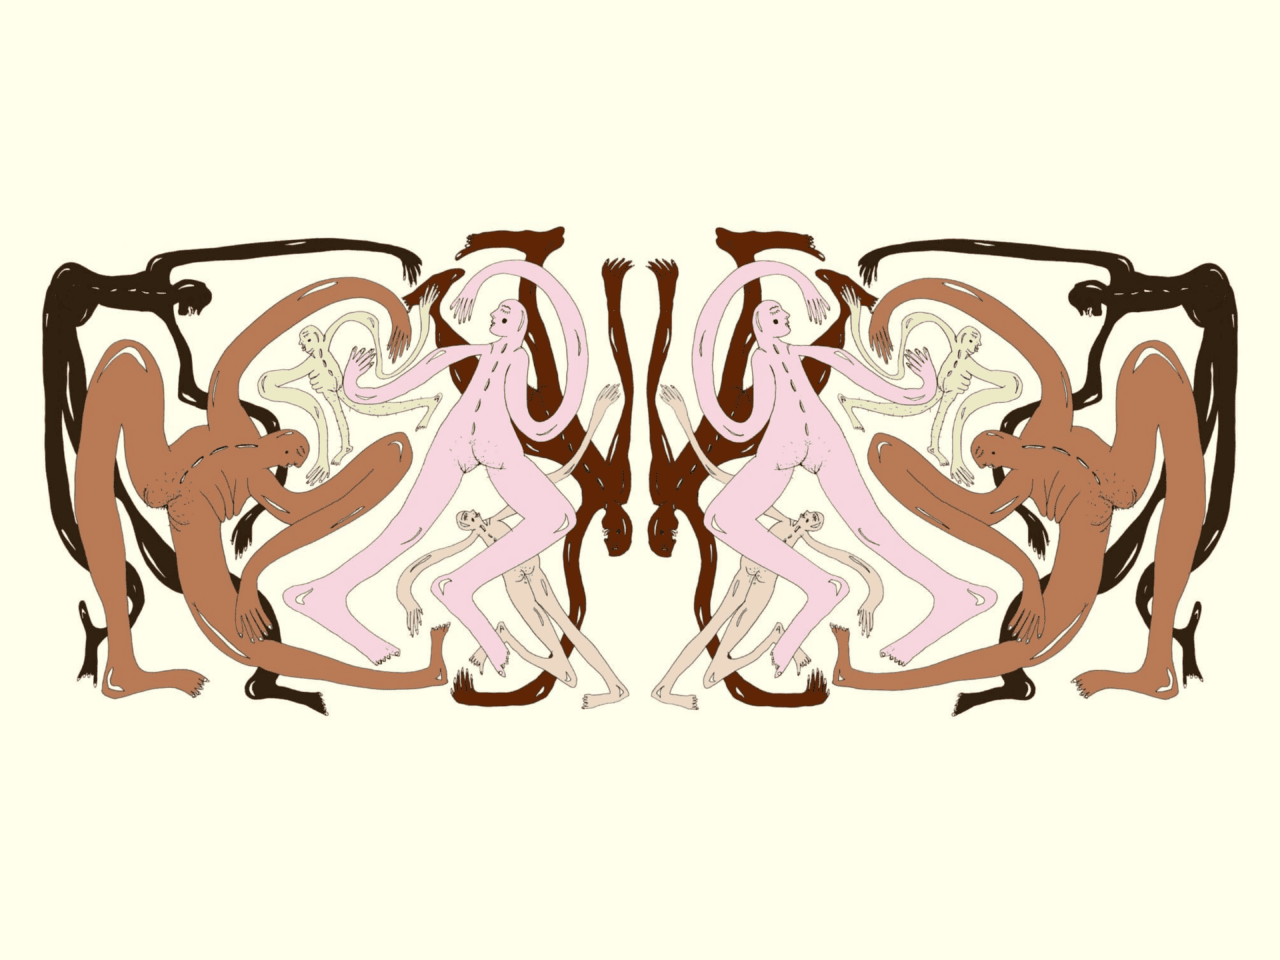 semi-abstract illustration of a series of nude people who aren't stereotypically male or female